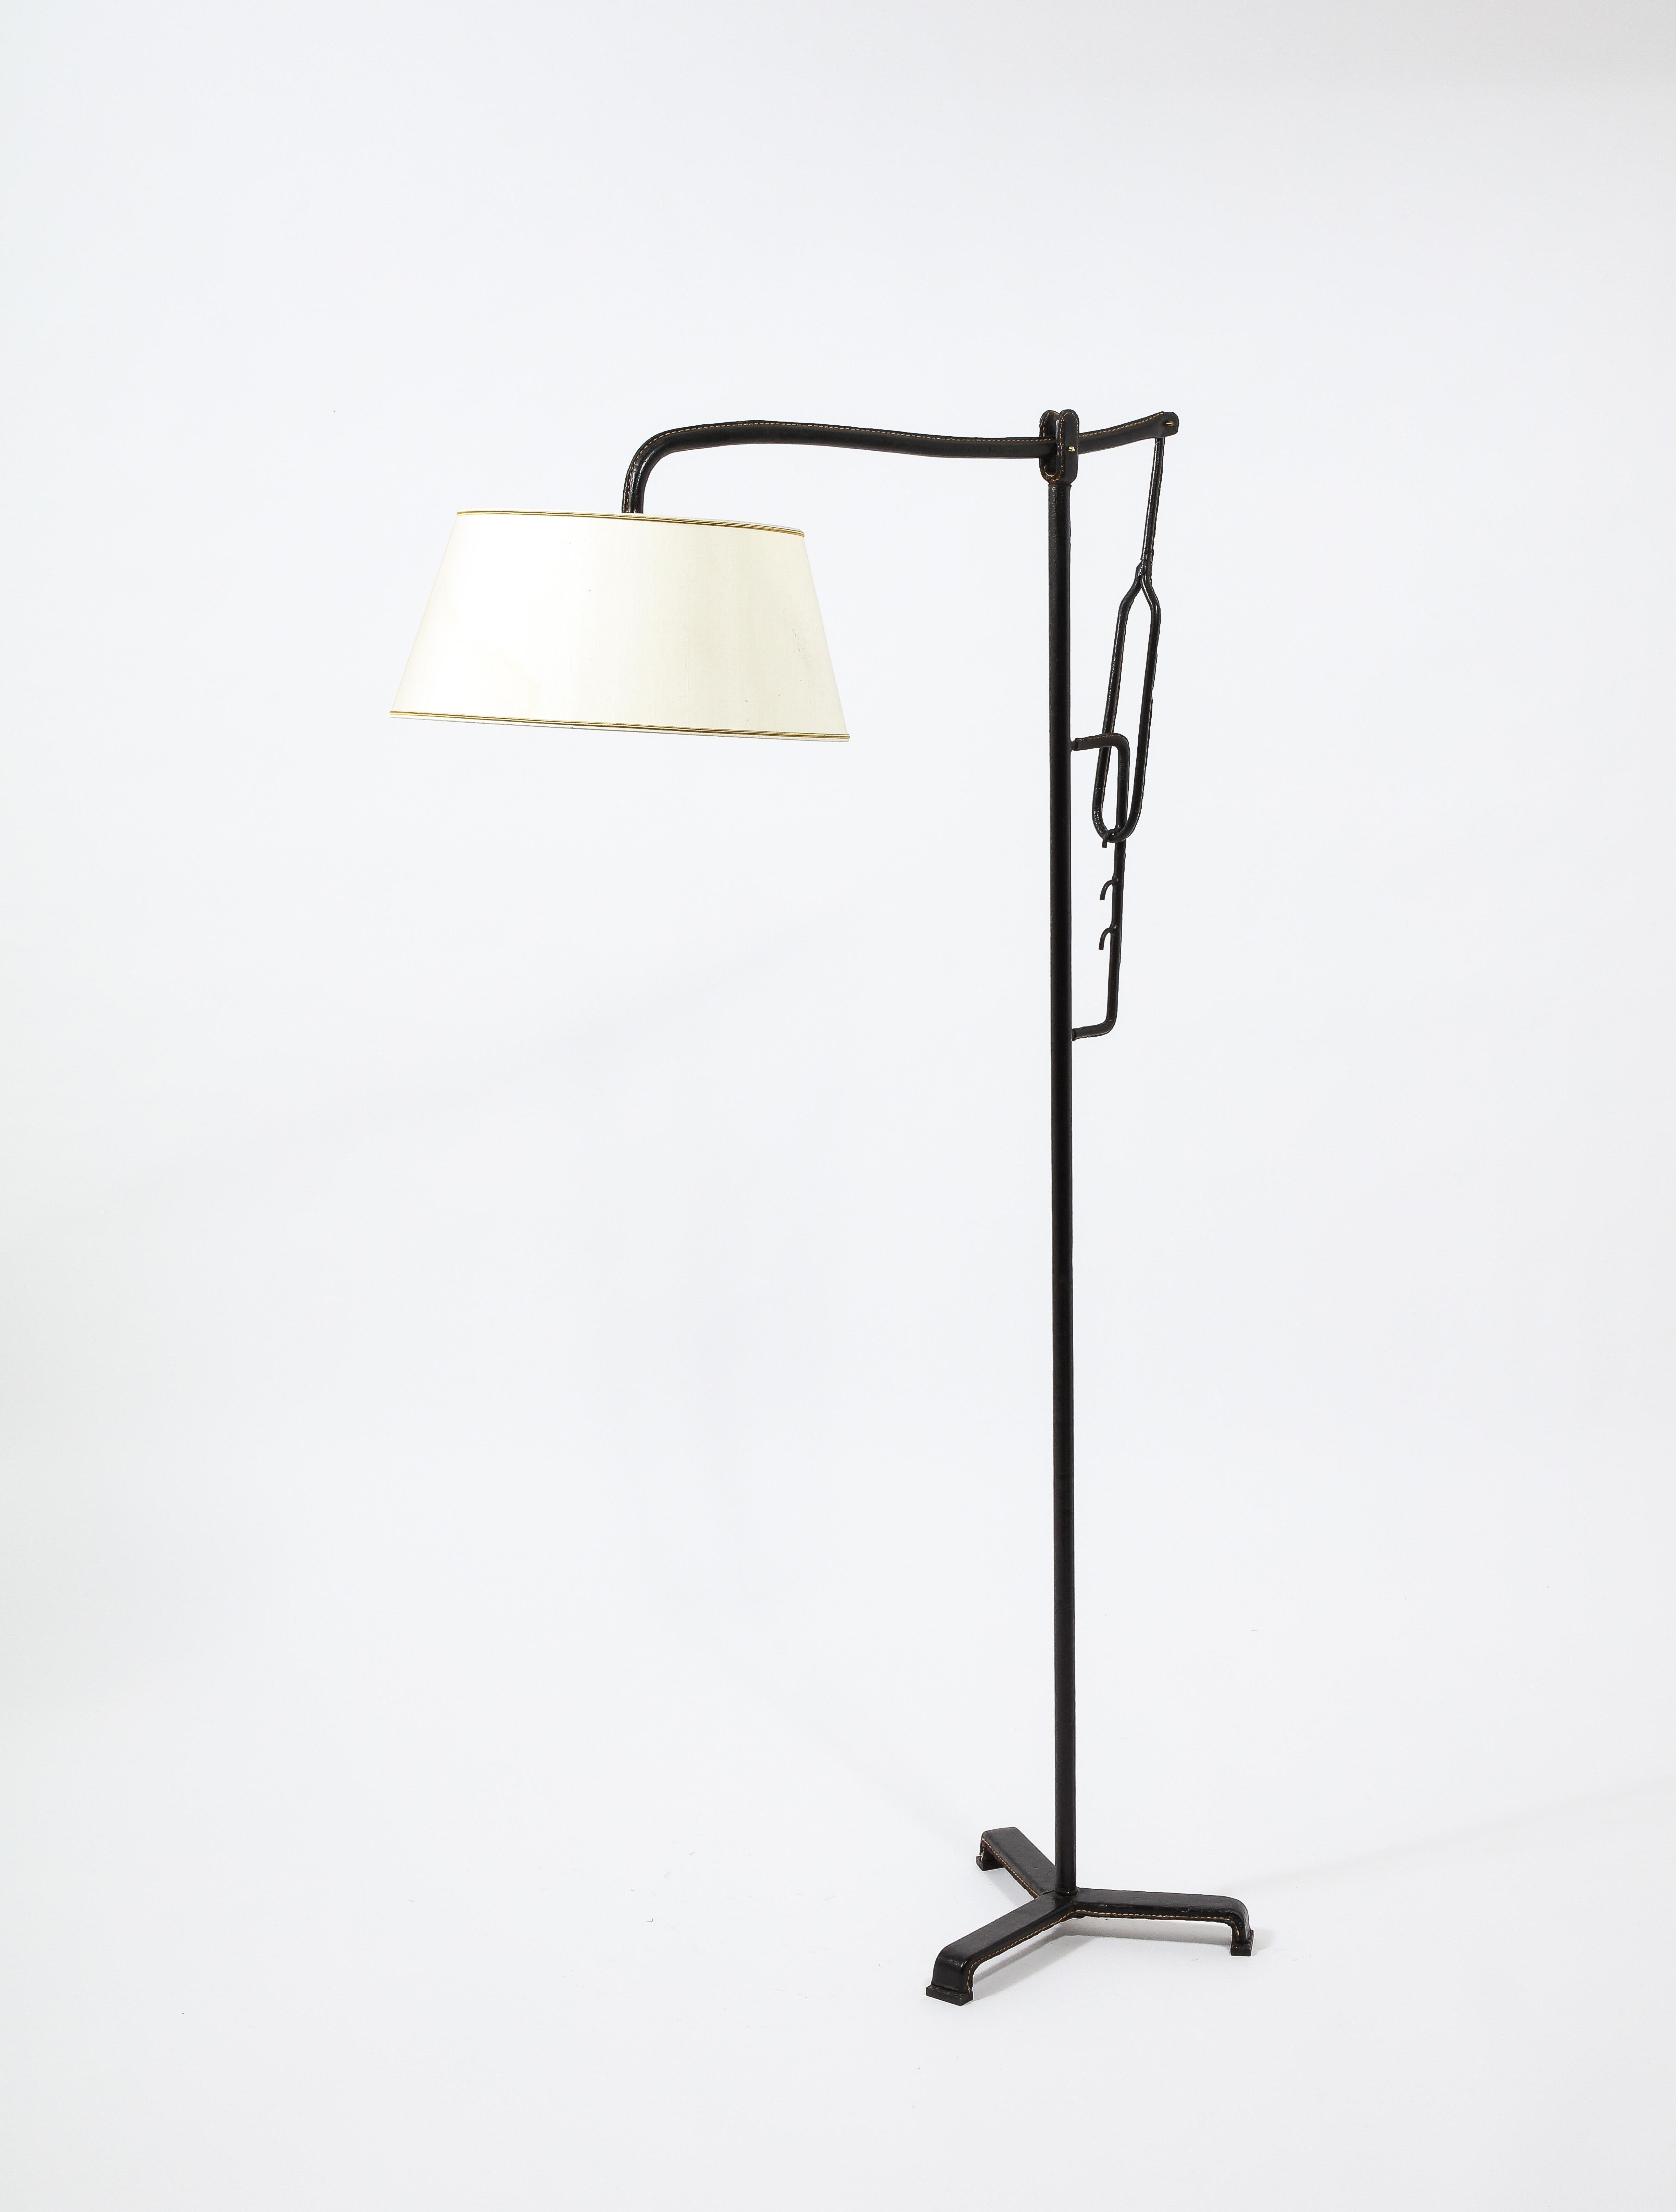 Jacques Adnet Black Leather Potence Floor Lamp, France 1940's For Sale 12